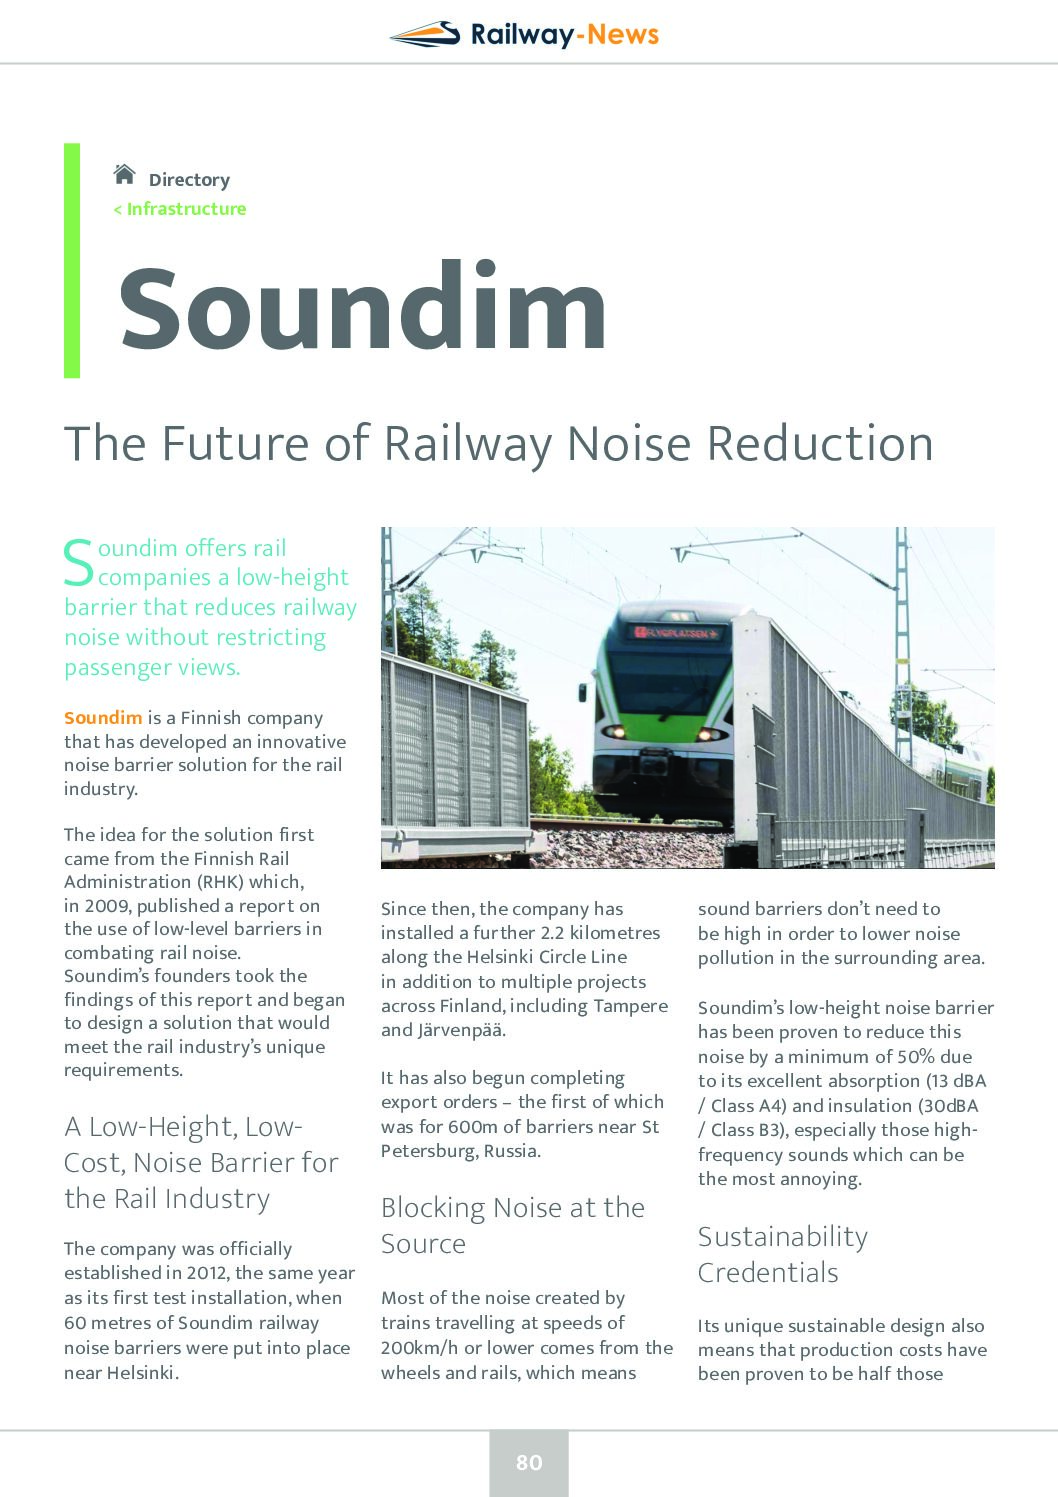 The Future of Railway Noise Reduction